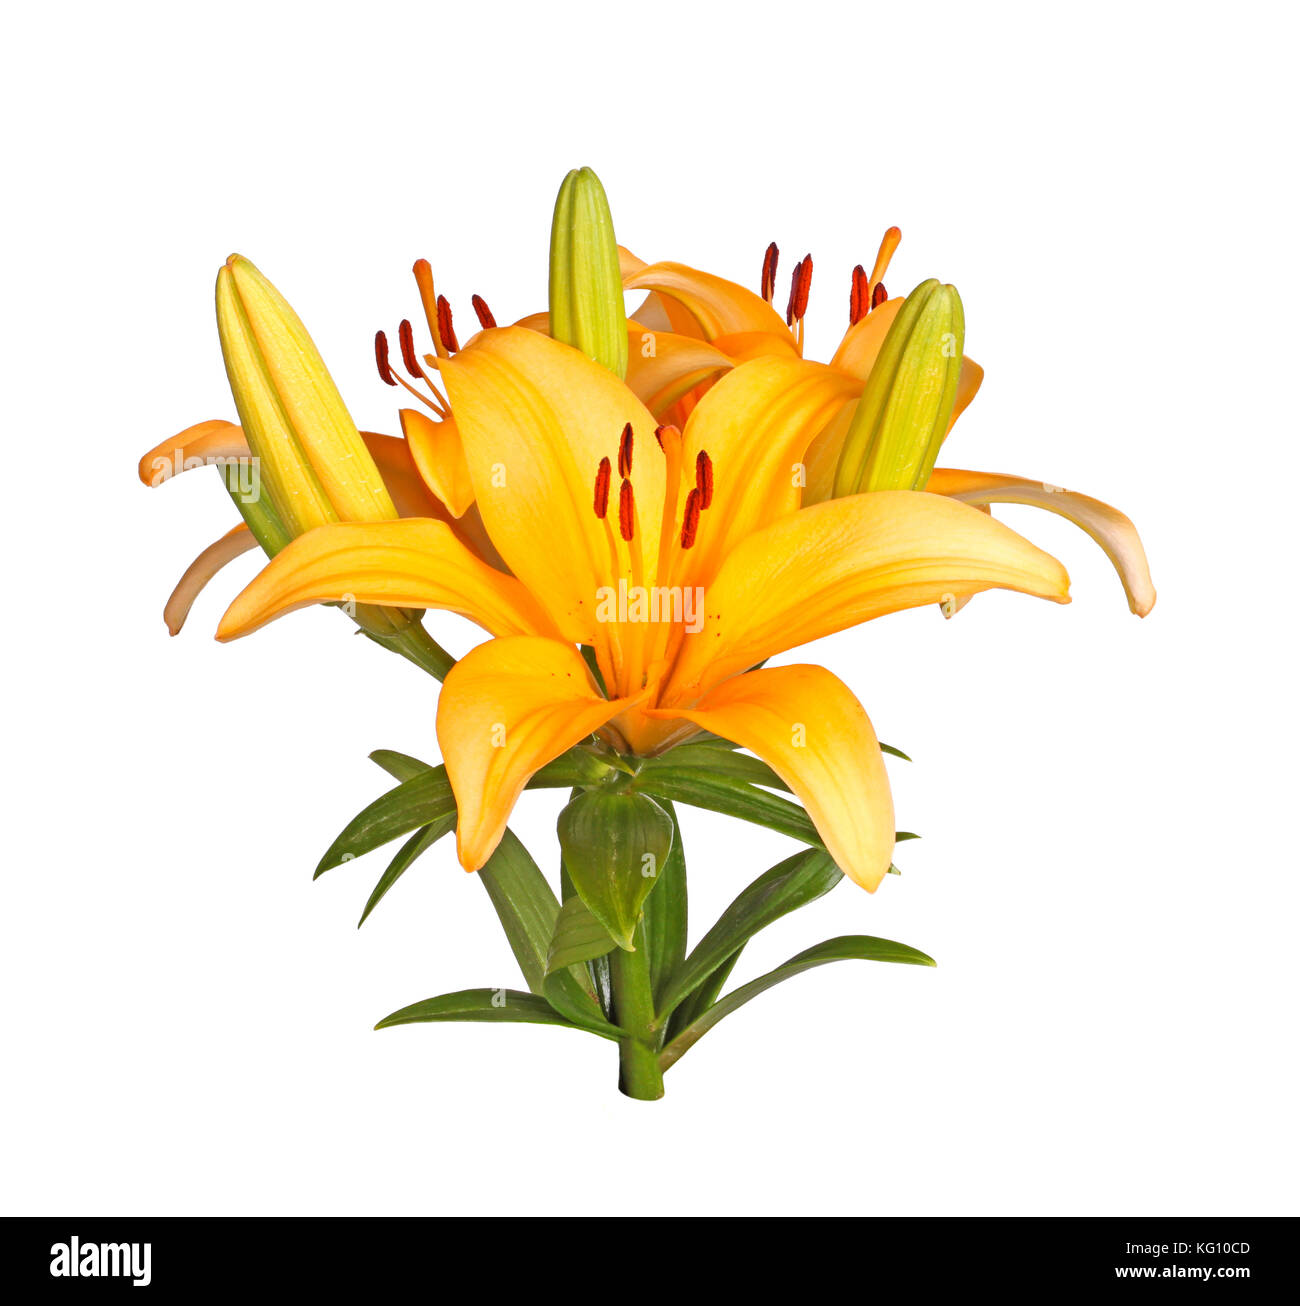 Single stem with bright orange flowers of an Asiatic liily hybrid isolated against a white background Stock Photo